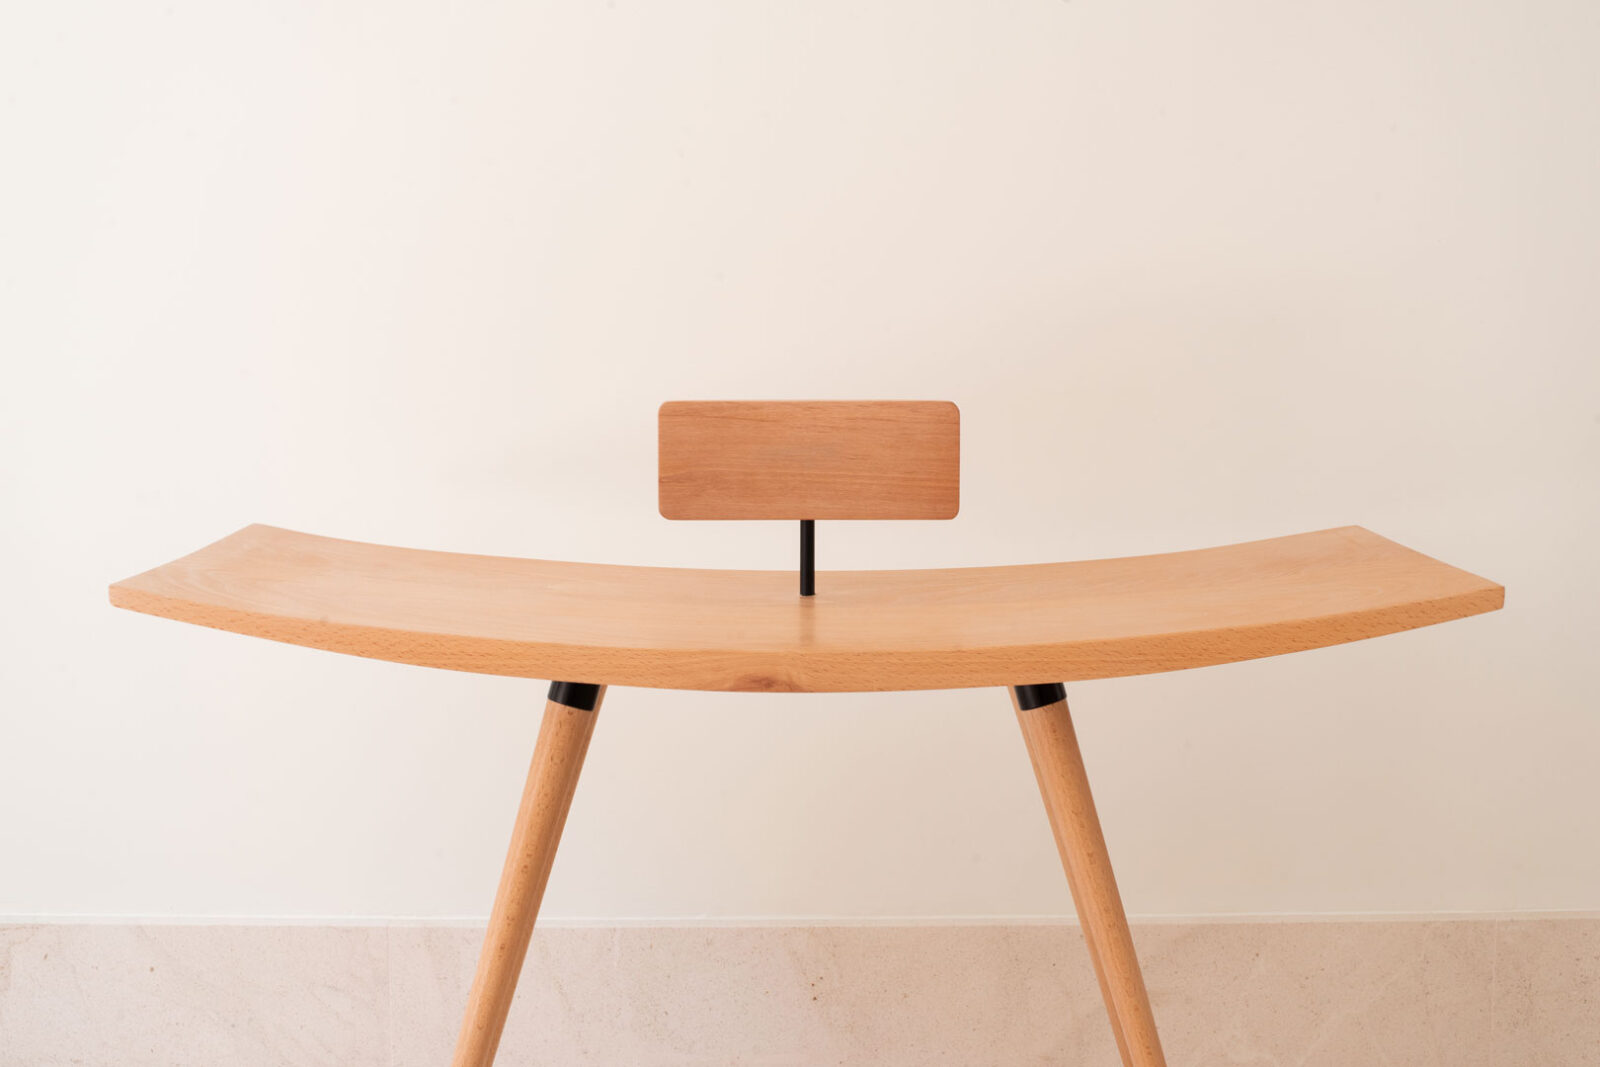 Archisearch Moji stool | by Iterate arquitectos